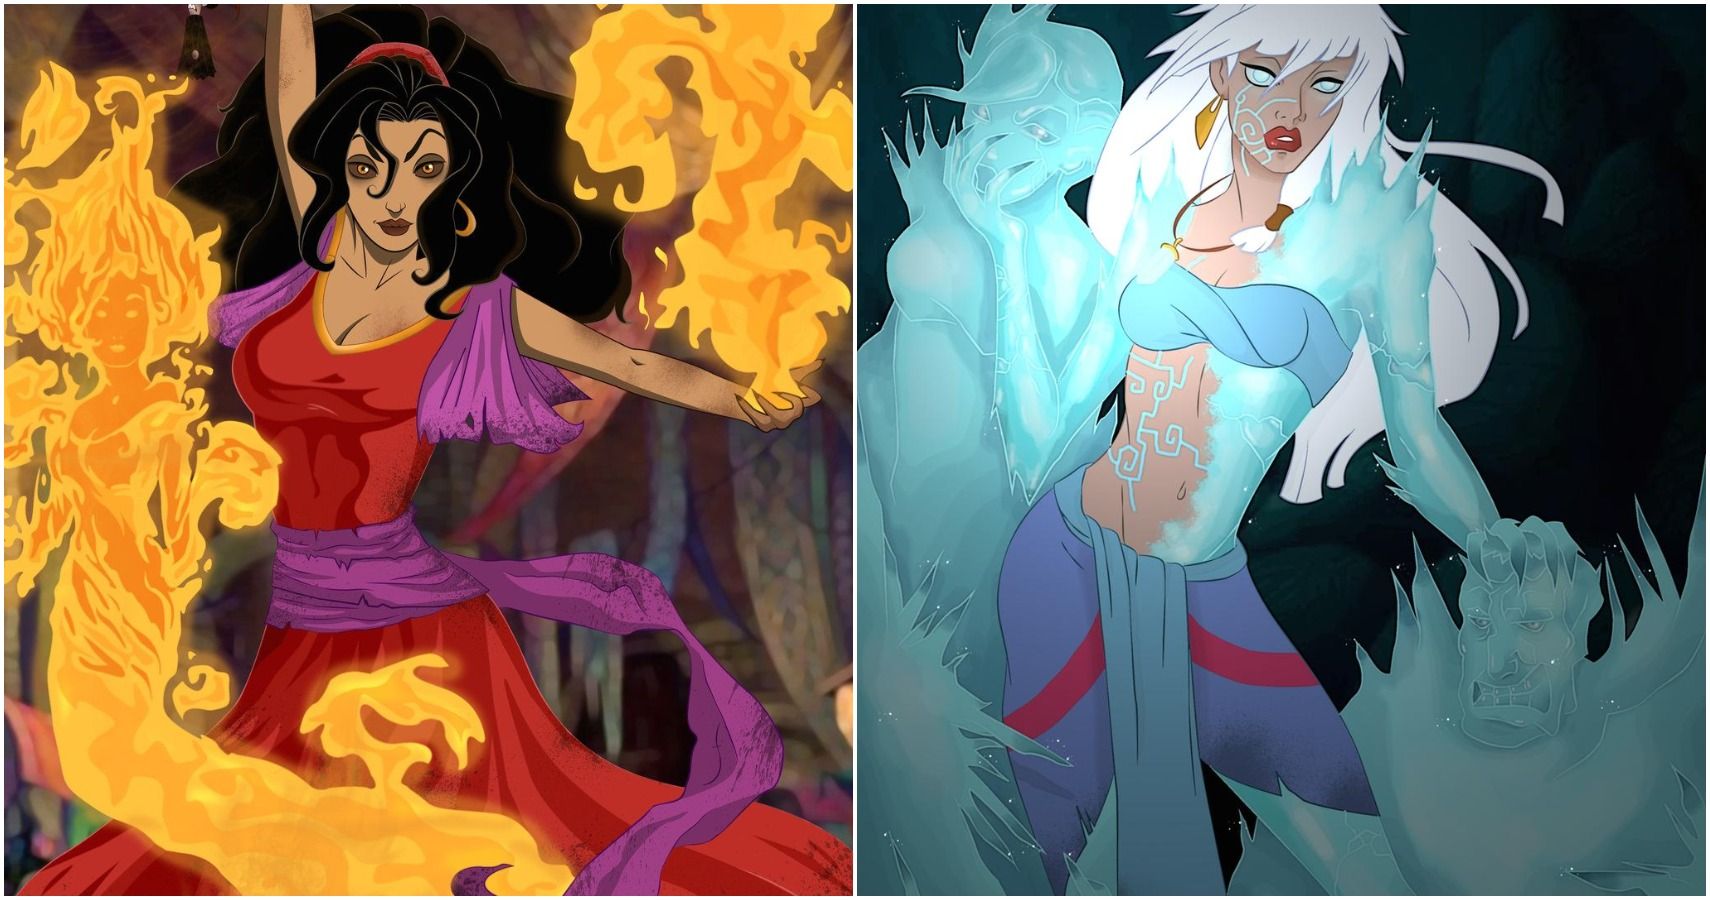 10 Disney Princesses From The 90s Reimagined As Villains